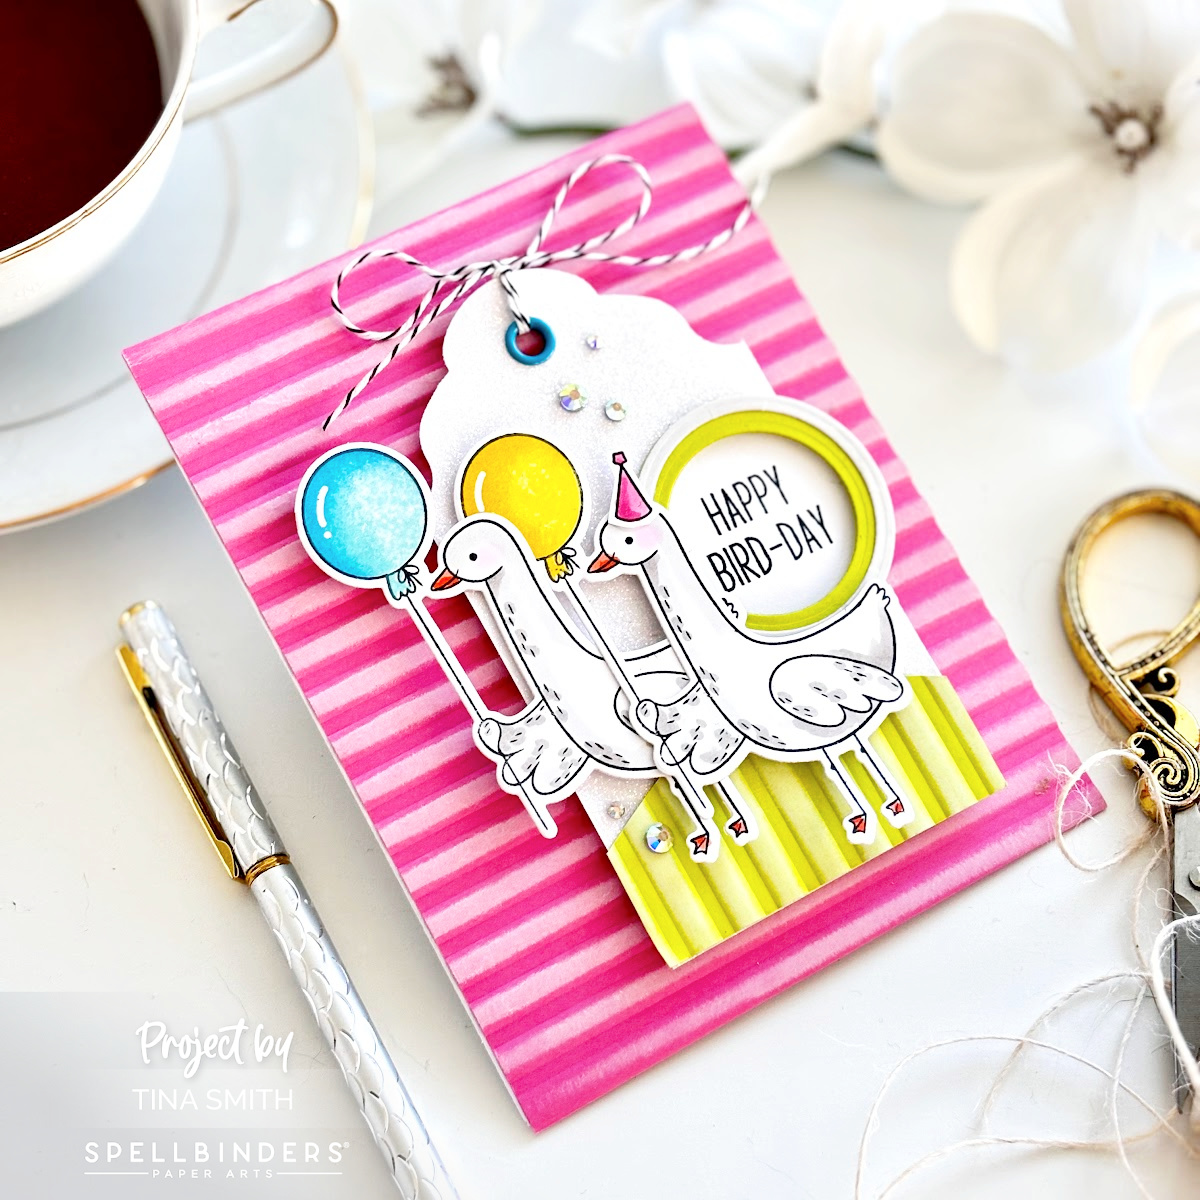 A Bird-day Card with the Ranger Silly Goose Stamp Set by Spellbinders!